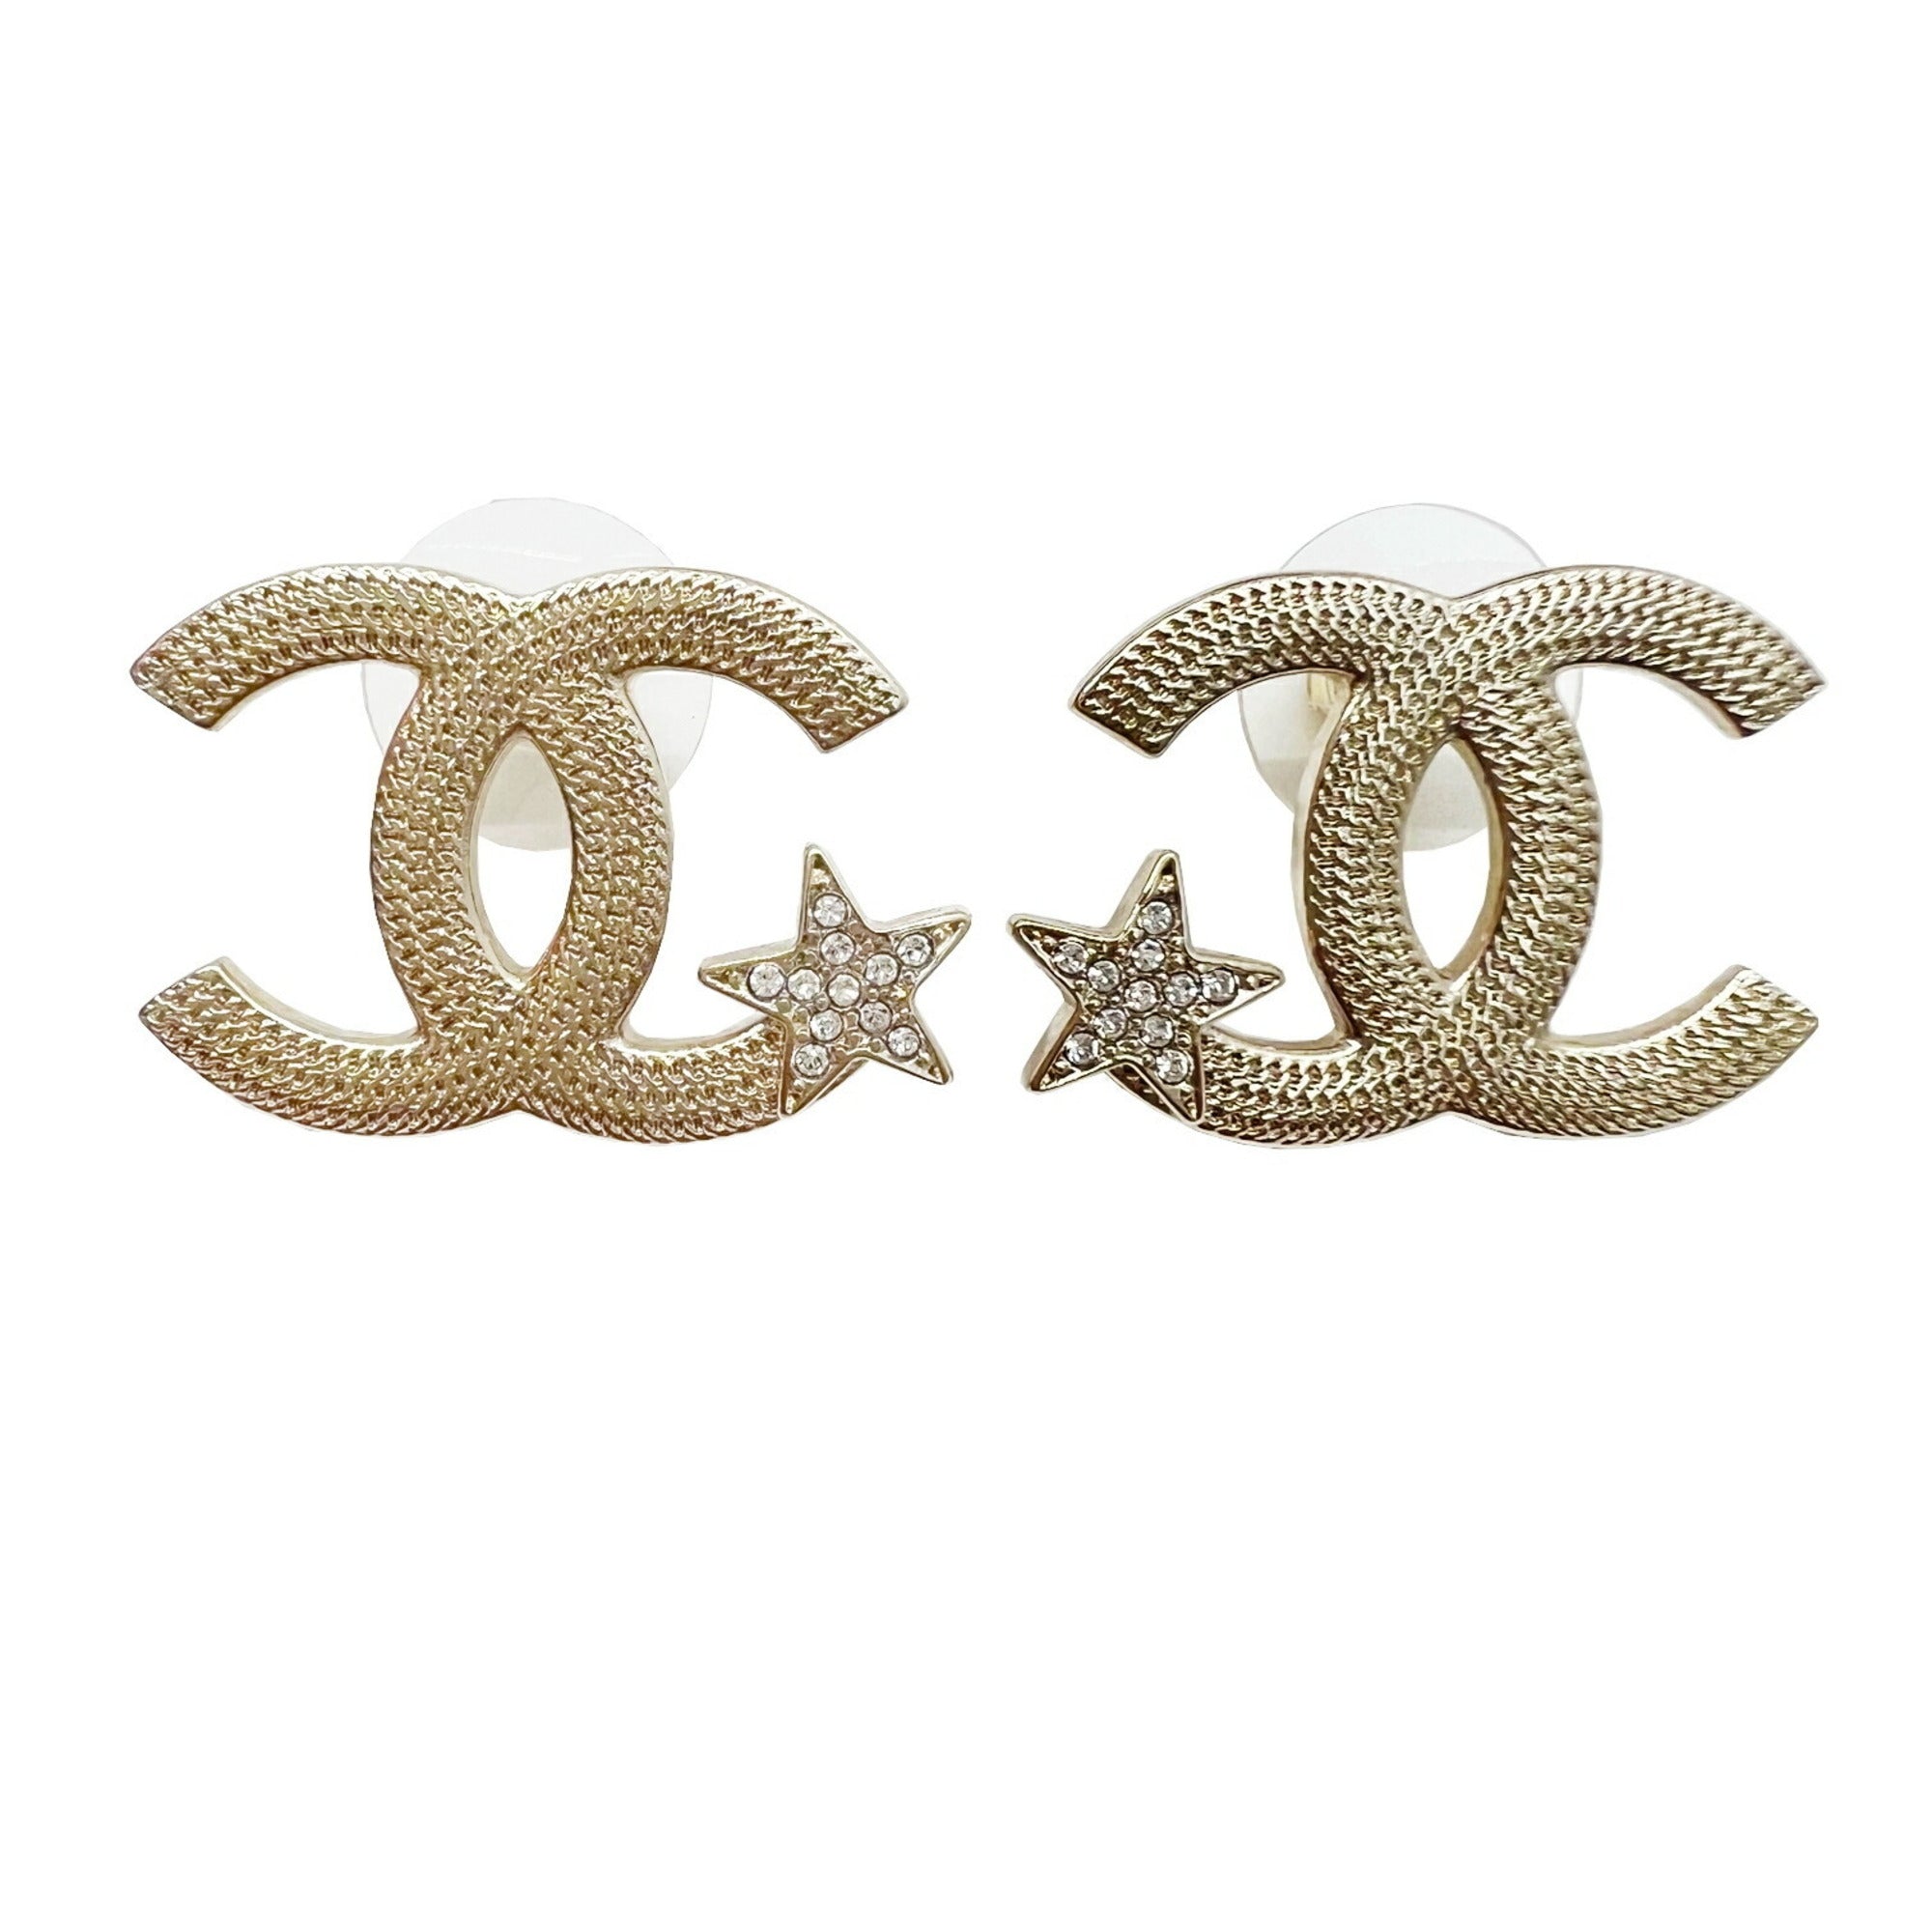 Buy Chanel Brooch Online In India -  India